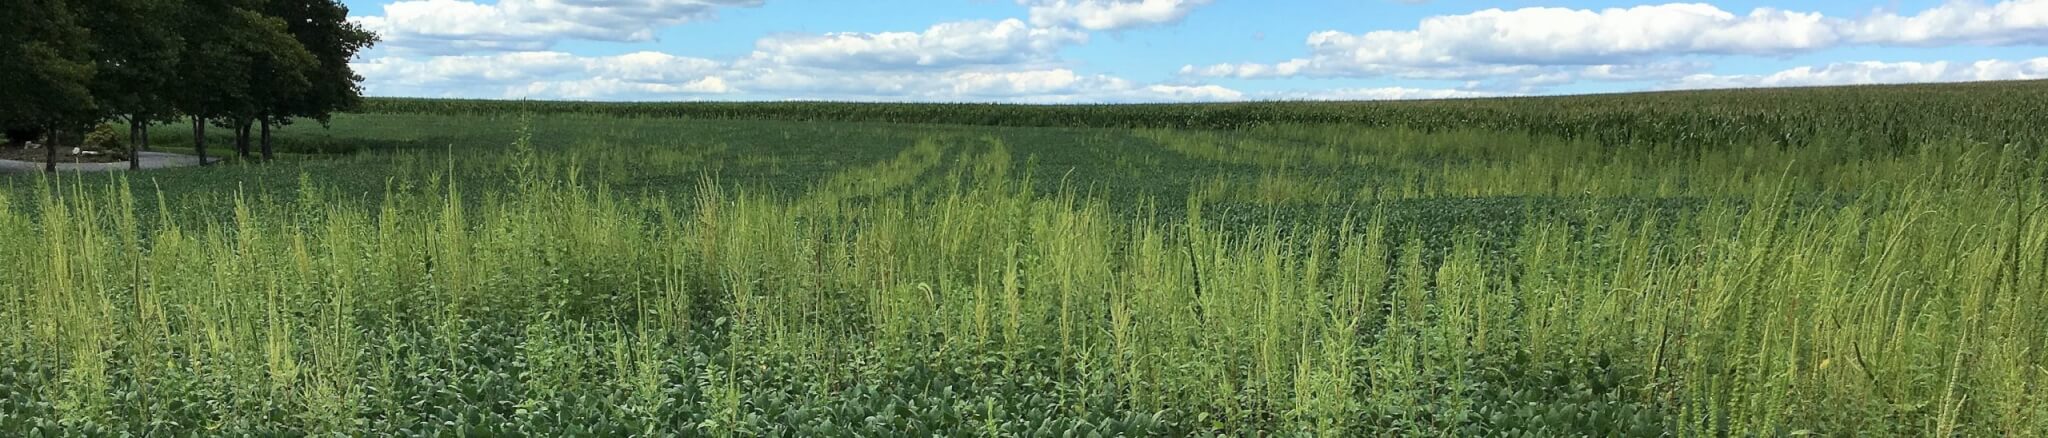 Soybean field with waterhemp that had been spread there by a contaminated combine during last year's harvest. See how the plants are growing is distinct rows (W. Curran, 2016)